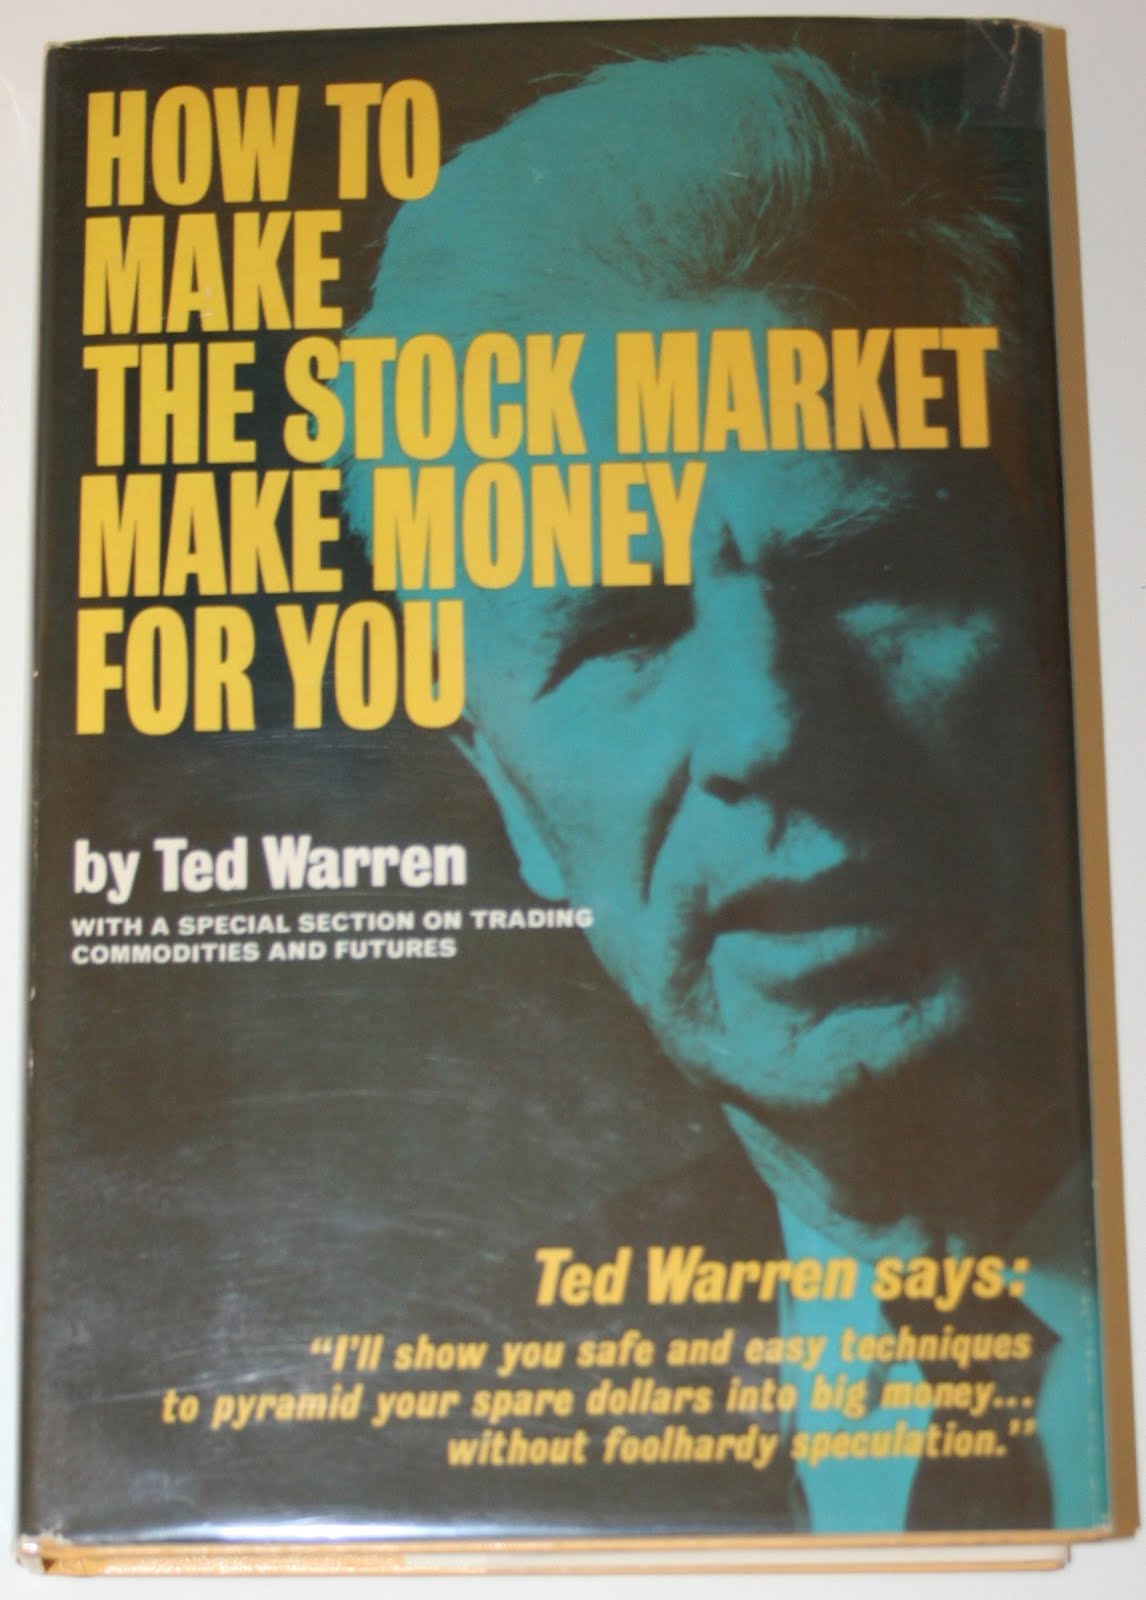 How To Make the Stock Market Make Money Ted Warren